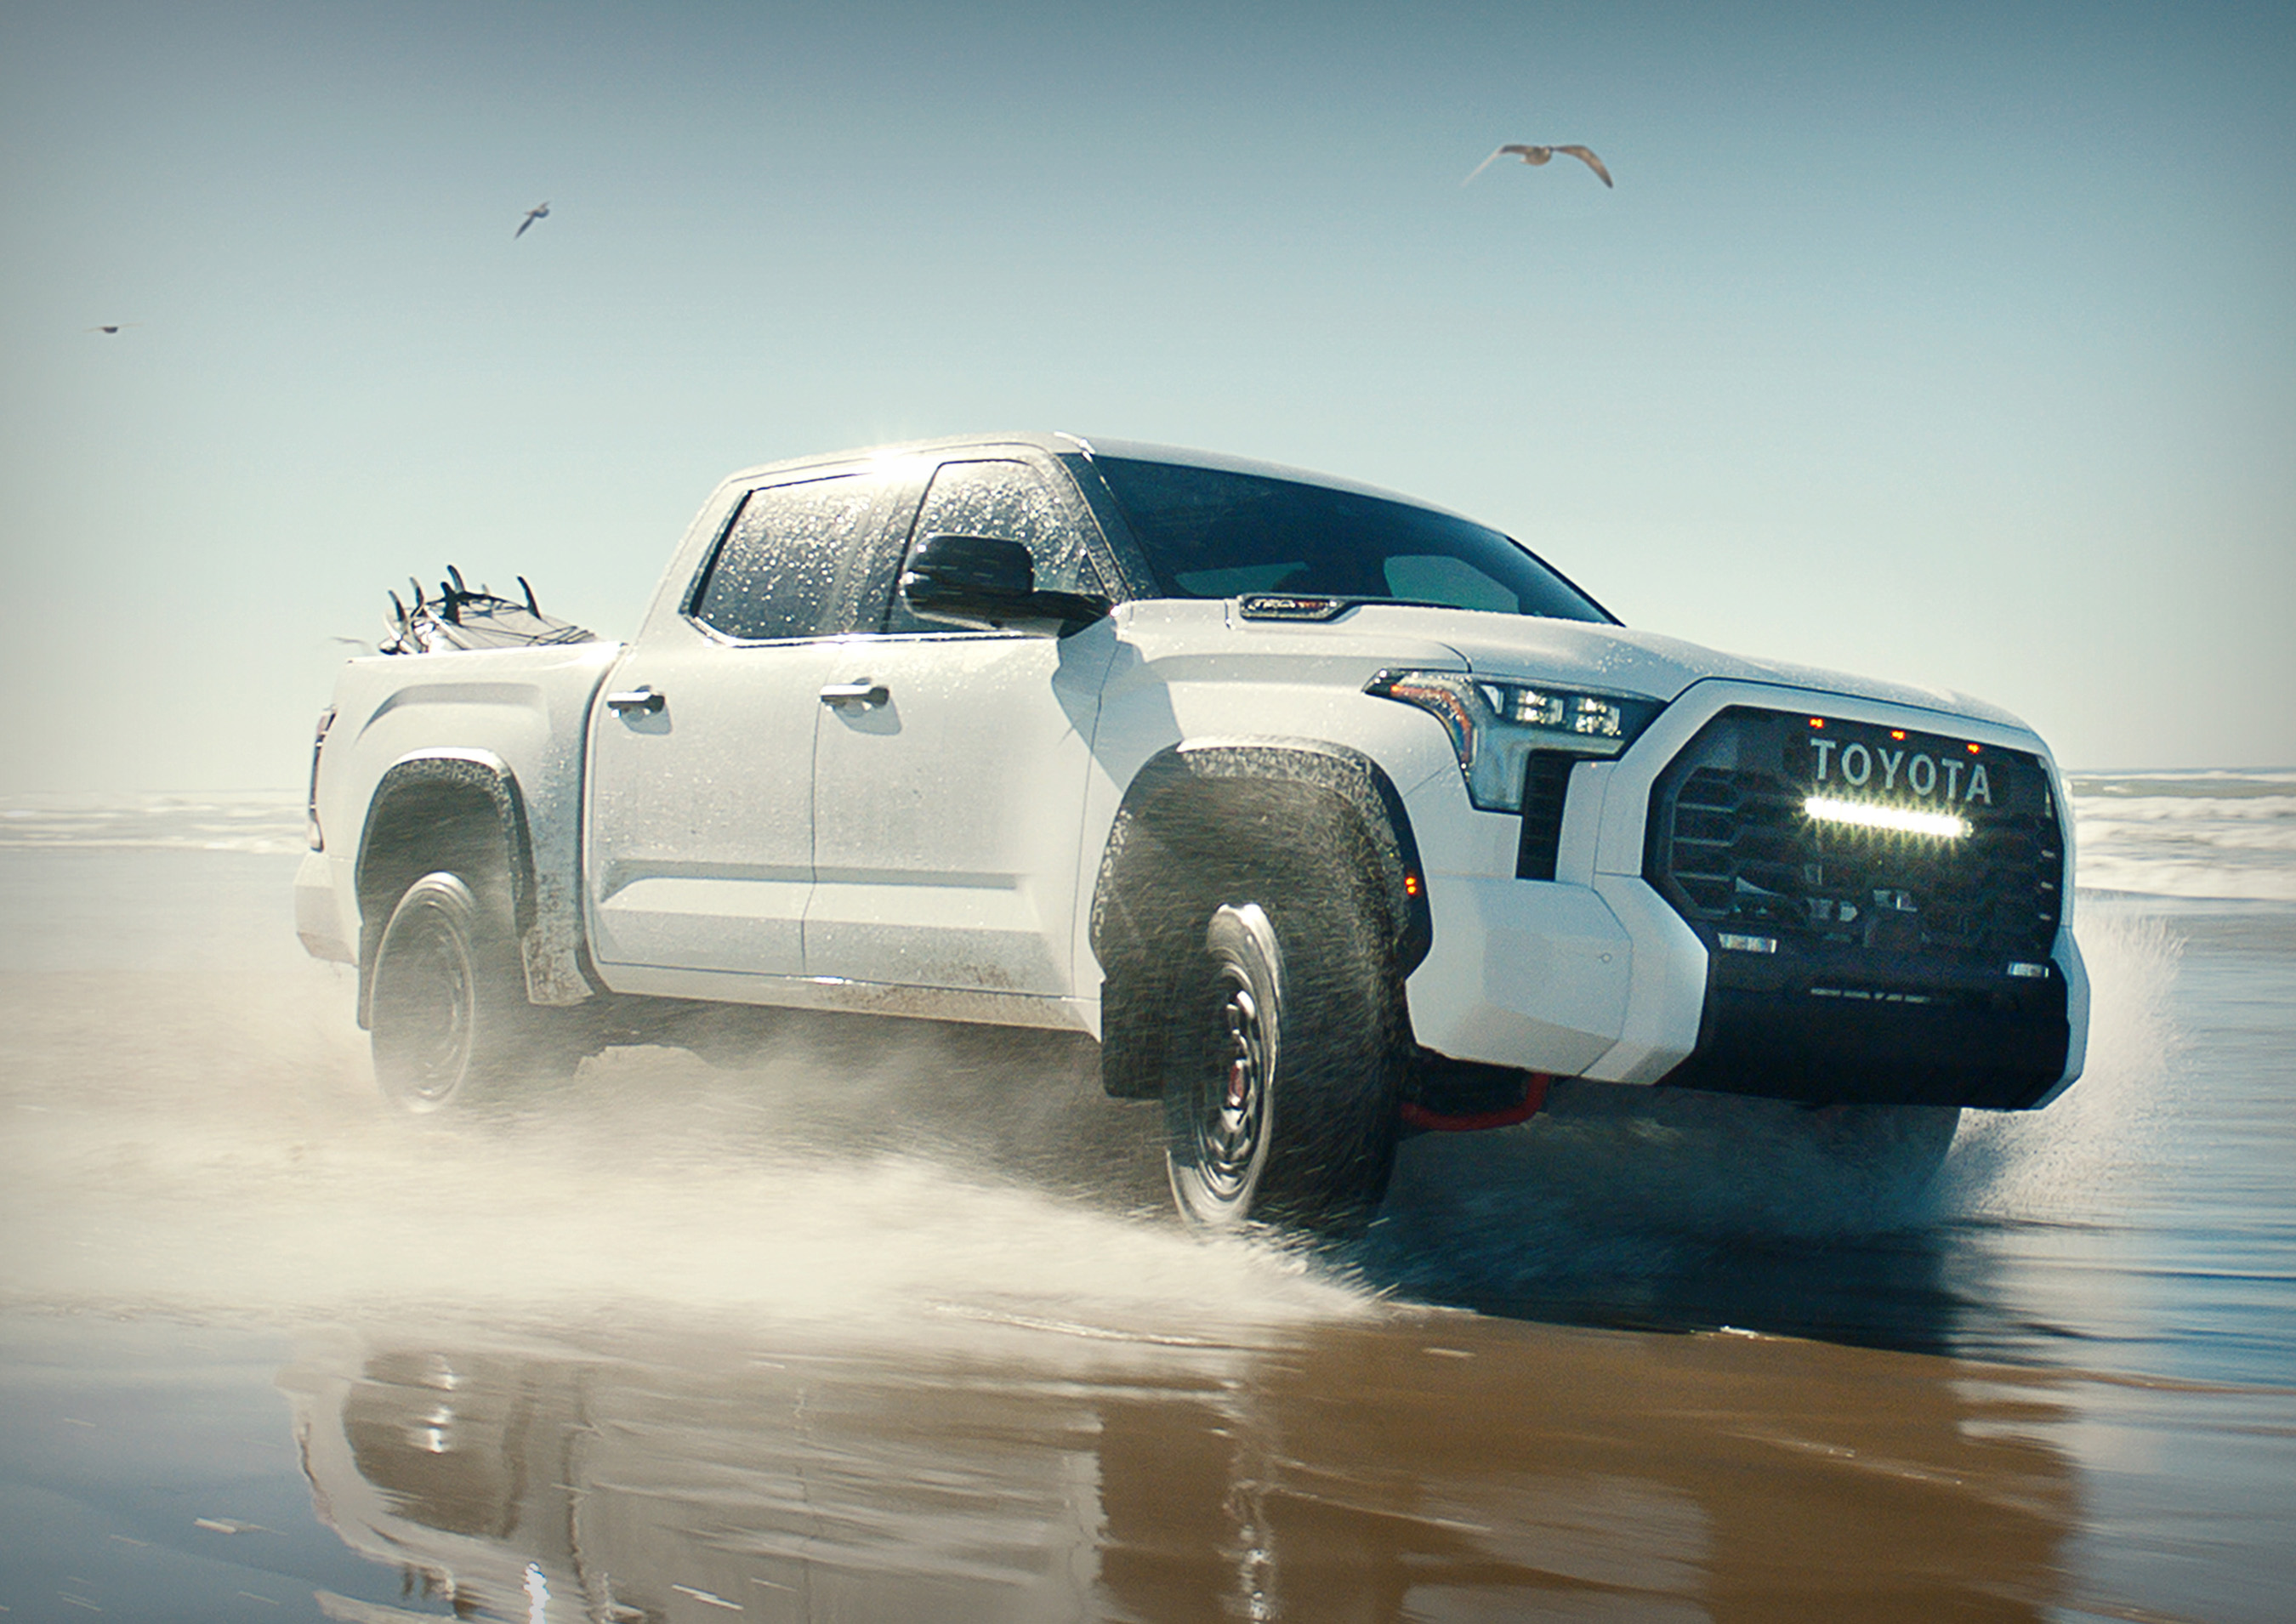 Toyota’s spot “Born For The Wild,” developed by Saatchi & Saatchi, highlights the all-new Tundra’s durability and power.